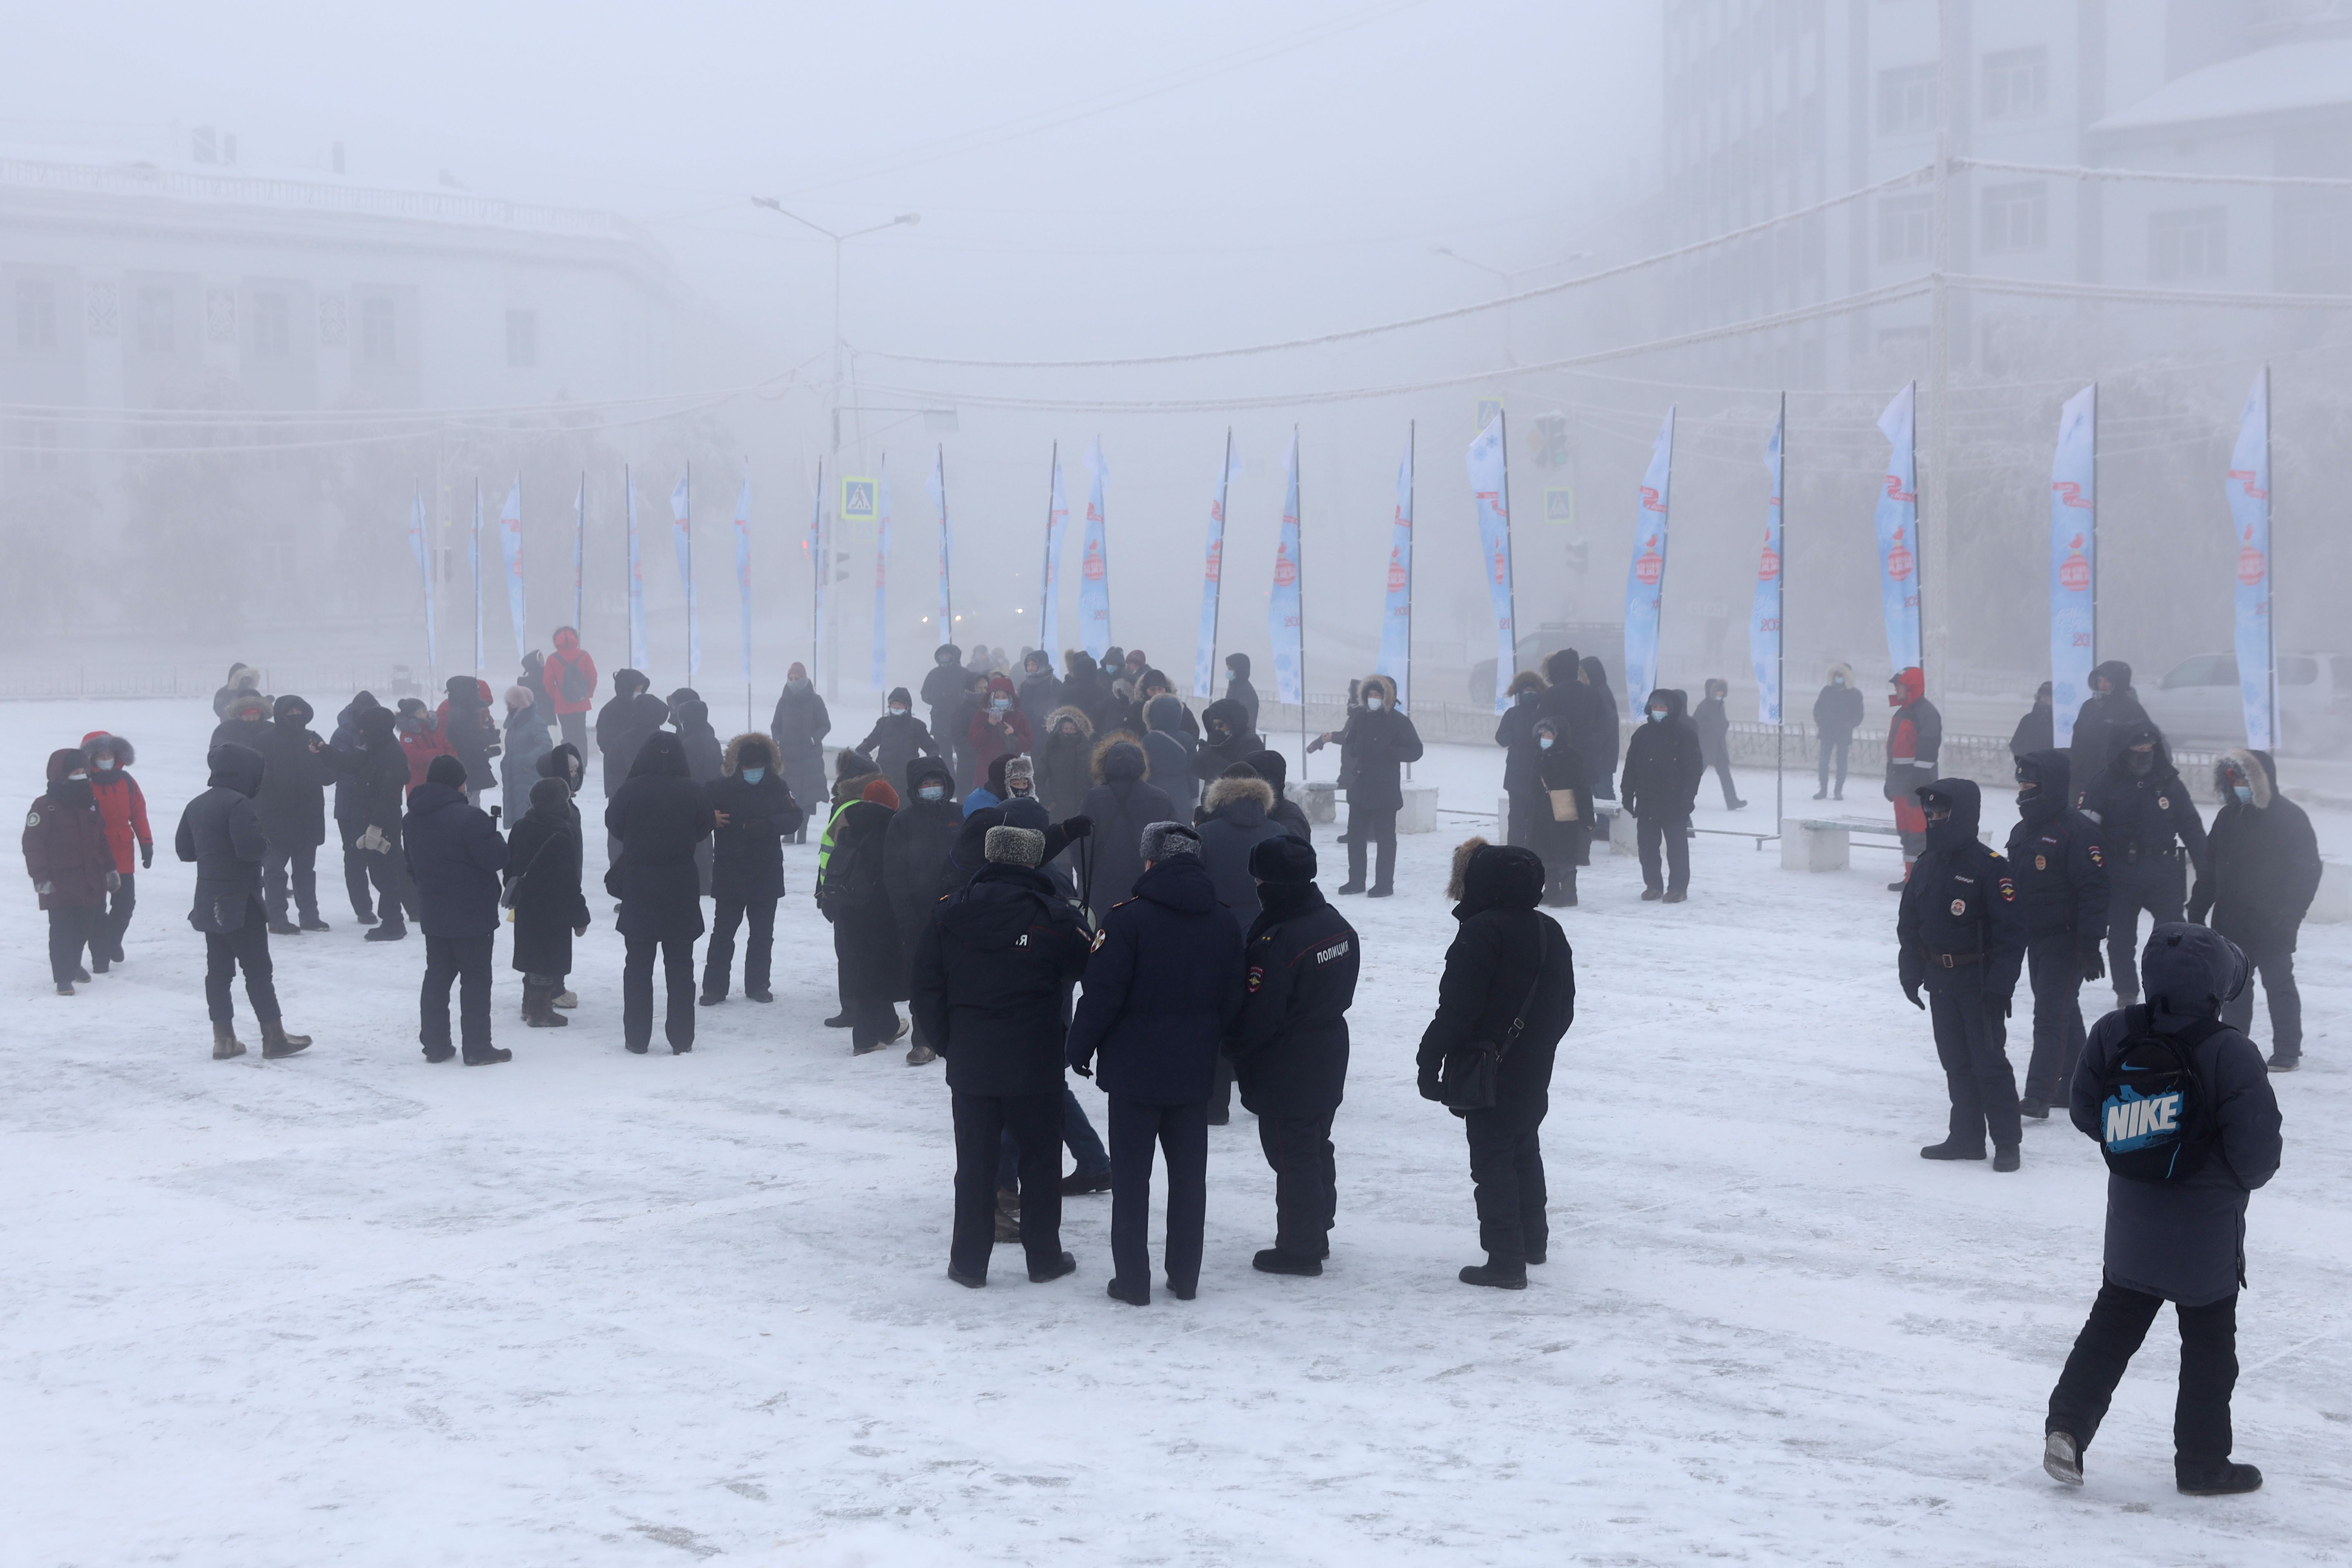 Demonstrators and police officers during a protest in support of the detained activist Alexei Navalny in Yakutsk, Republic of Sakha (Yakutia), in the Russian Far East.